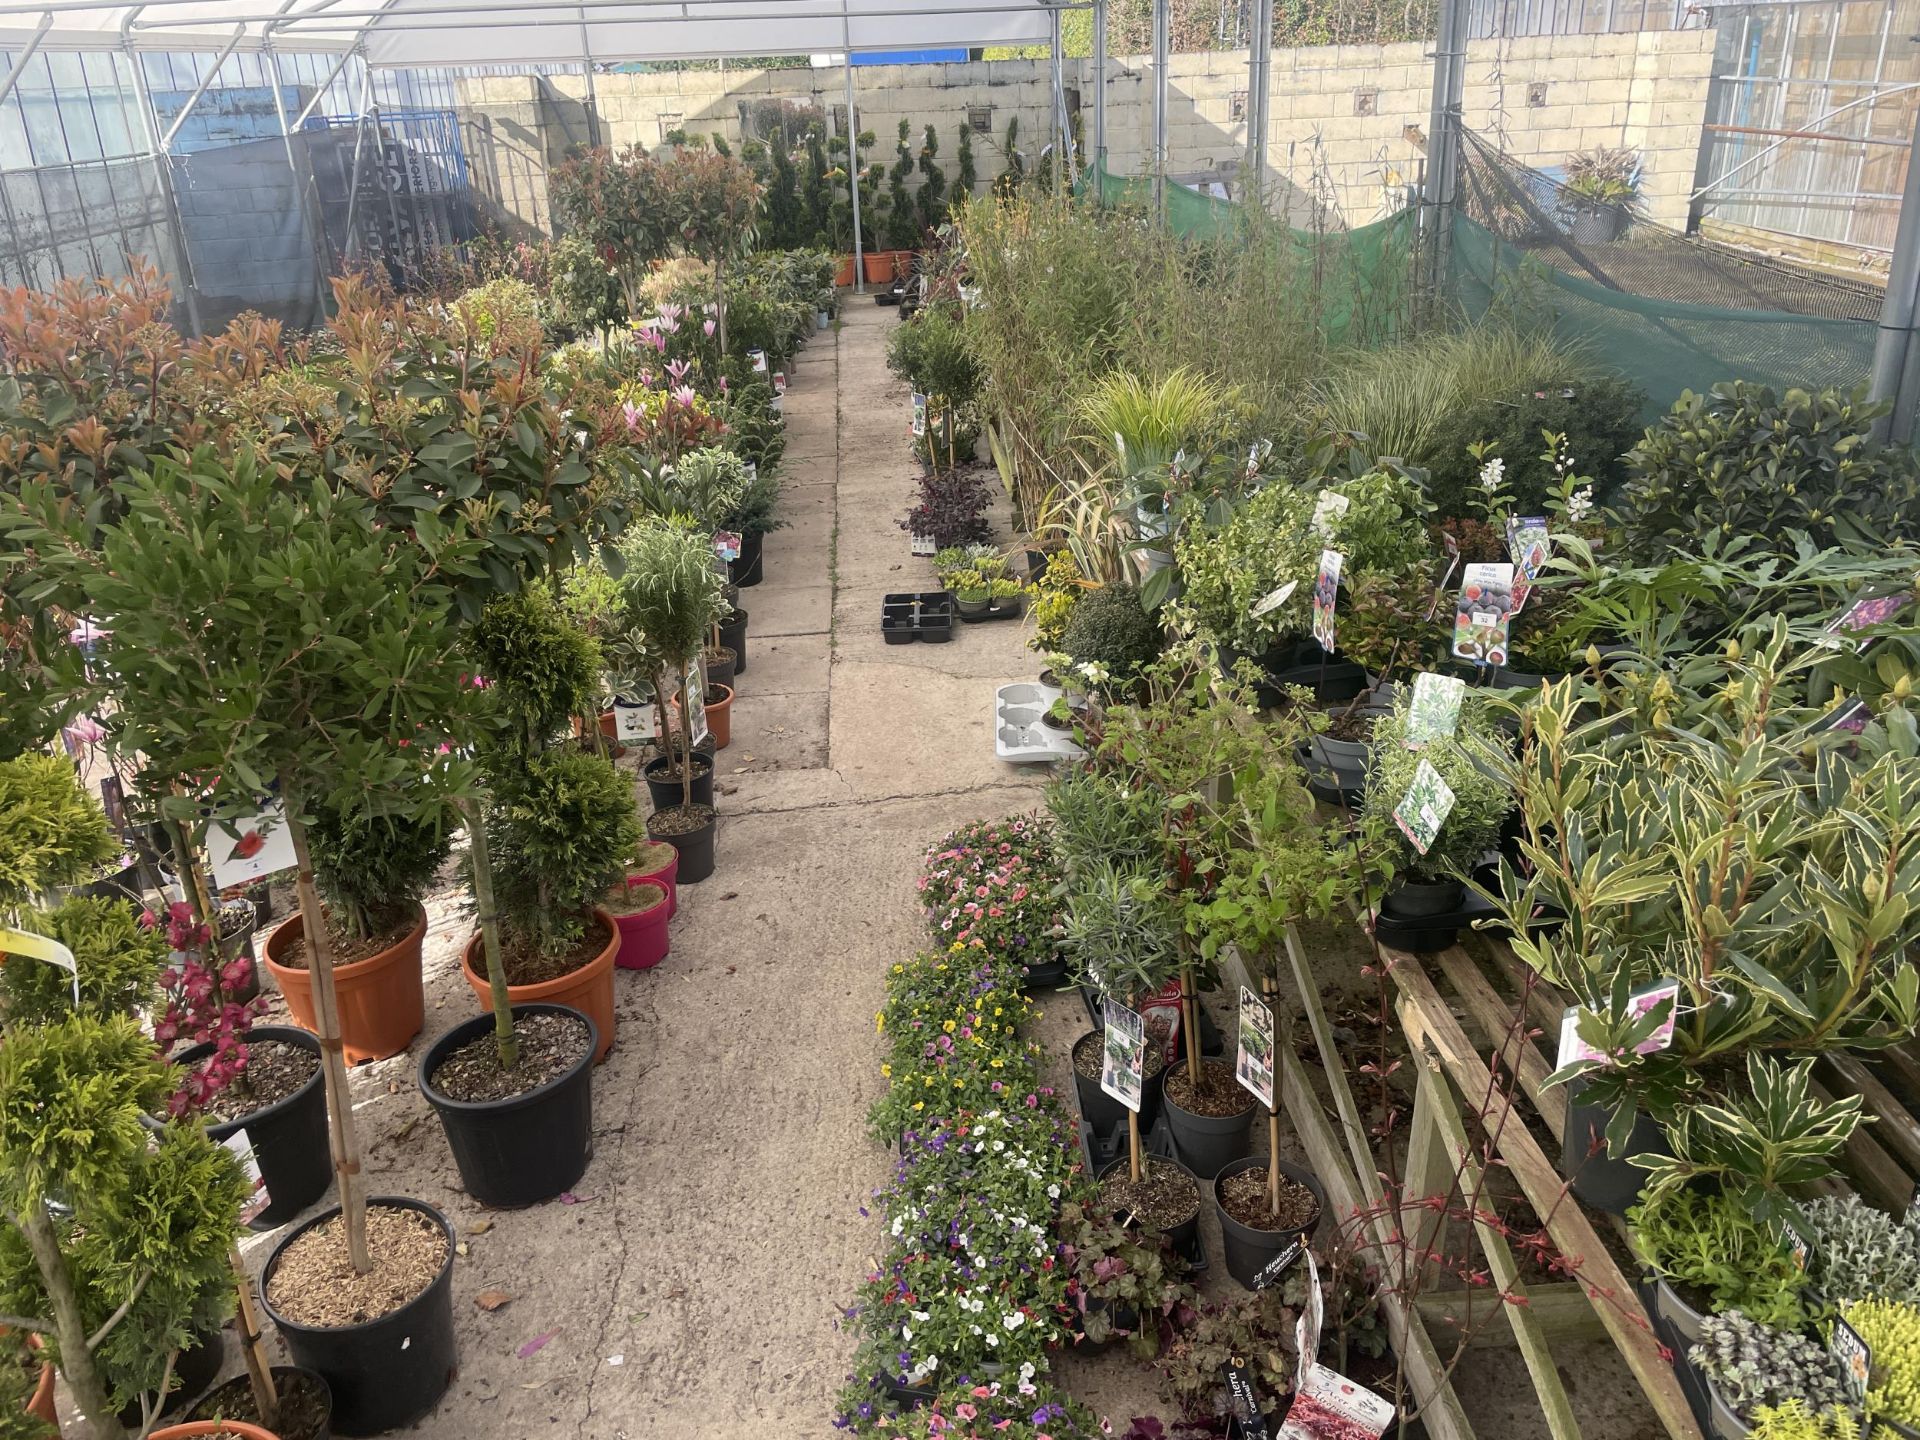 WELCOME TO ASHLEY WALLER HORTICULTURE AUCTION - LOTS ARE BEING ADDED DAILY - THE IMAGES SHOW LOTS - Image 9 of 51